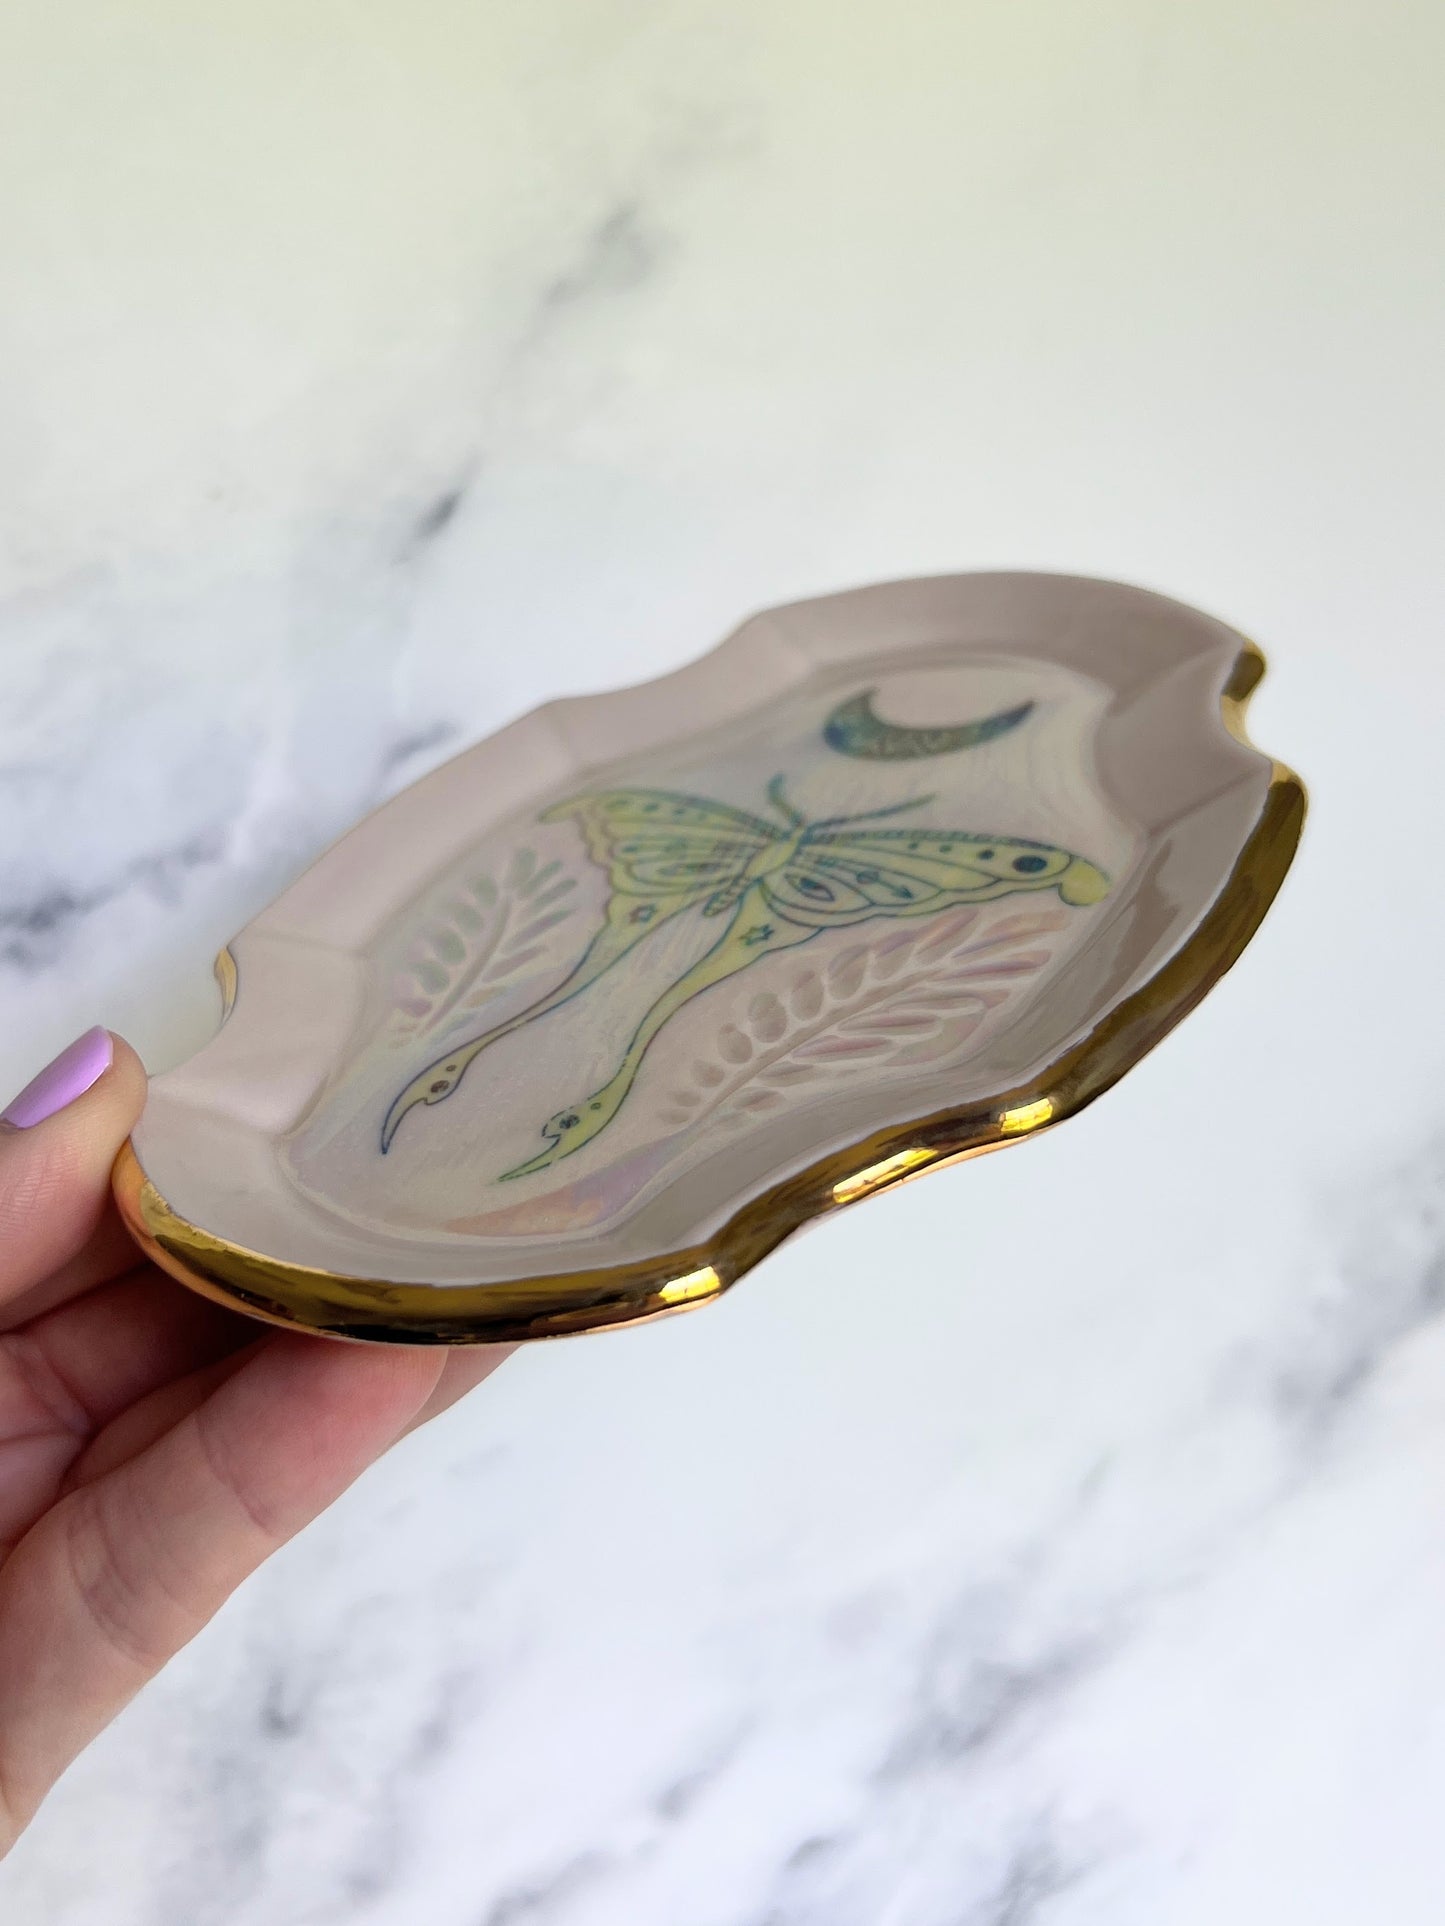 Luna Moth Tray Plate Iridescent Altar Tray Witchy Jewelry Dish